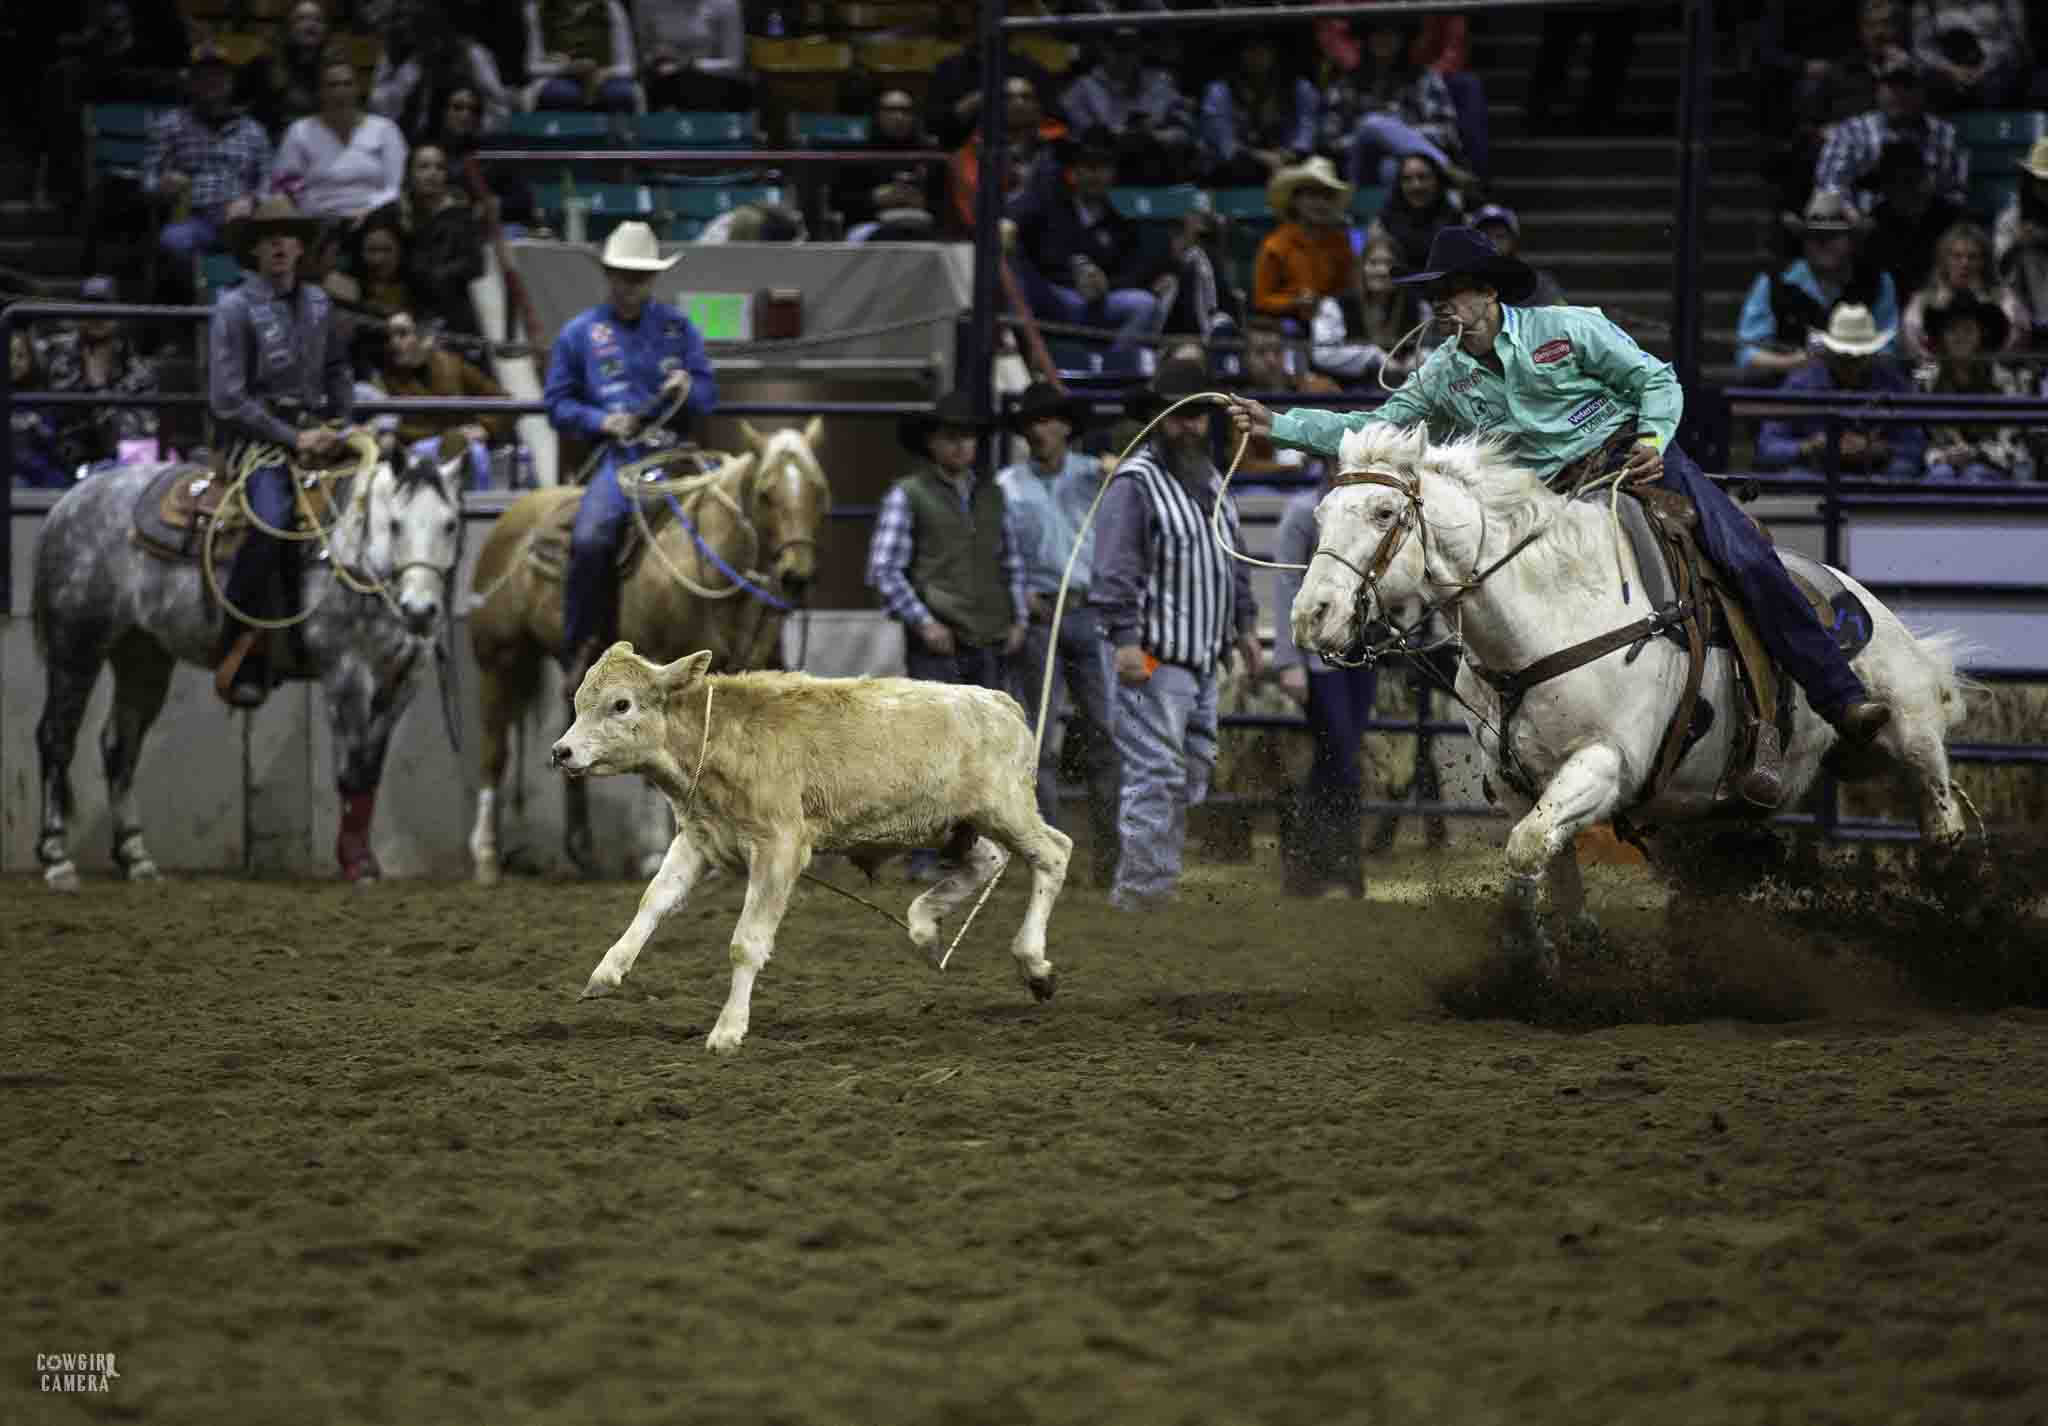 Tie Down Roper on a gray horse roping a blond color calf